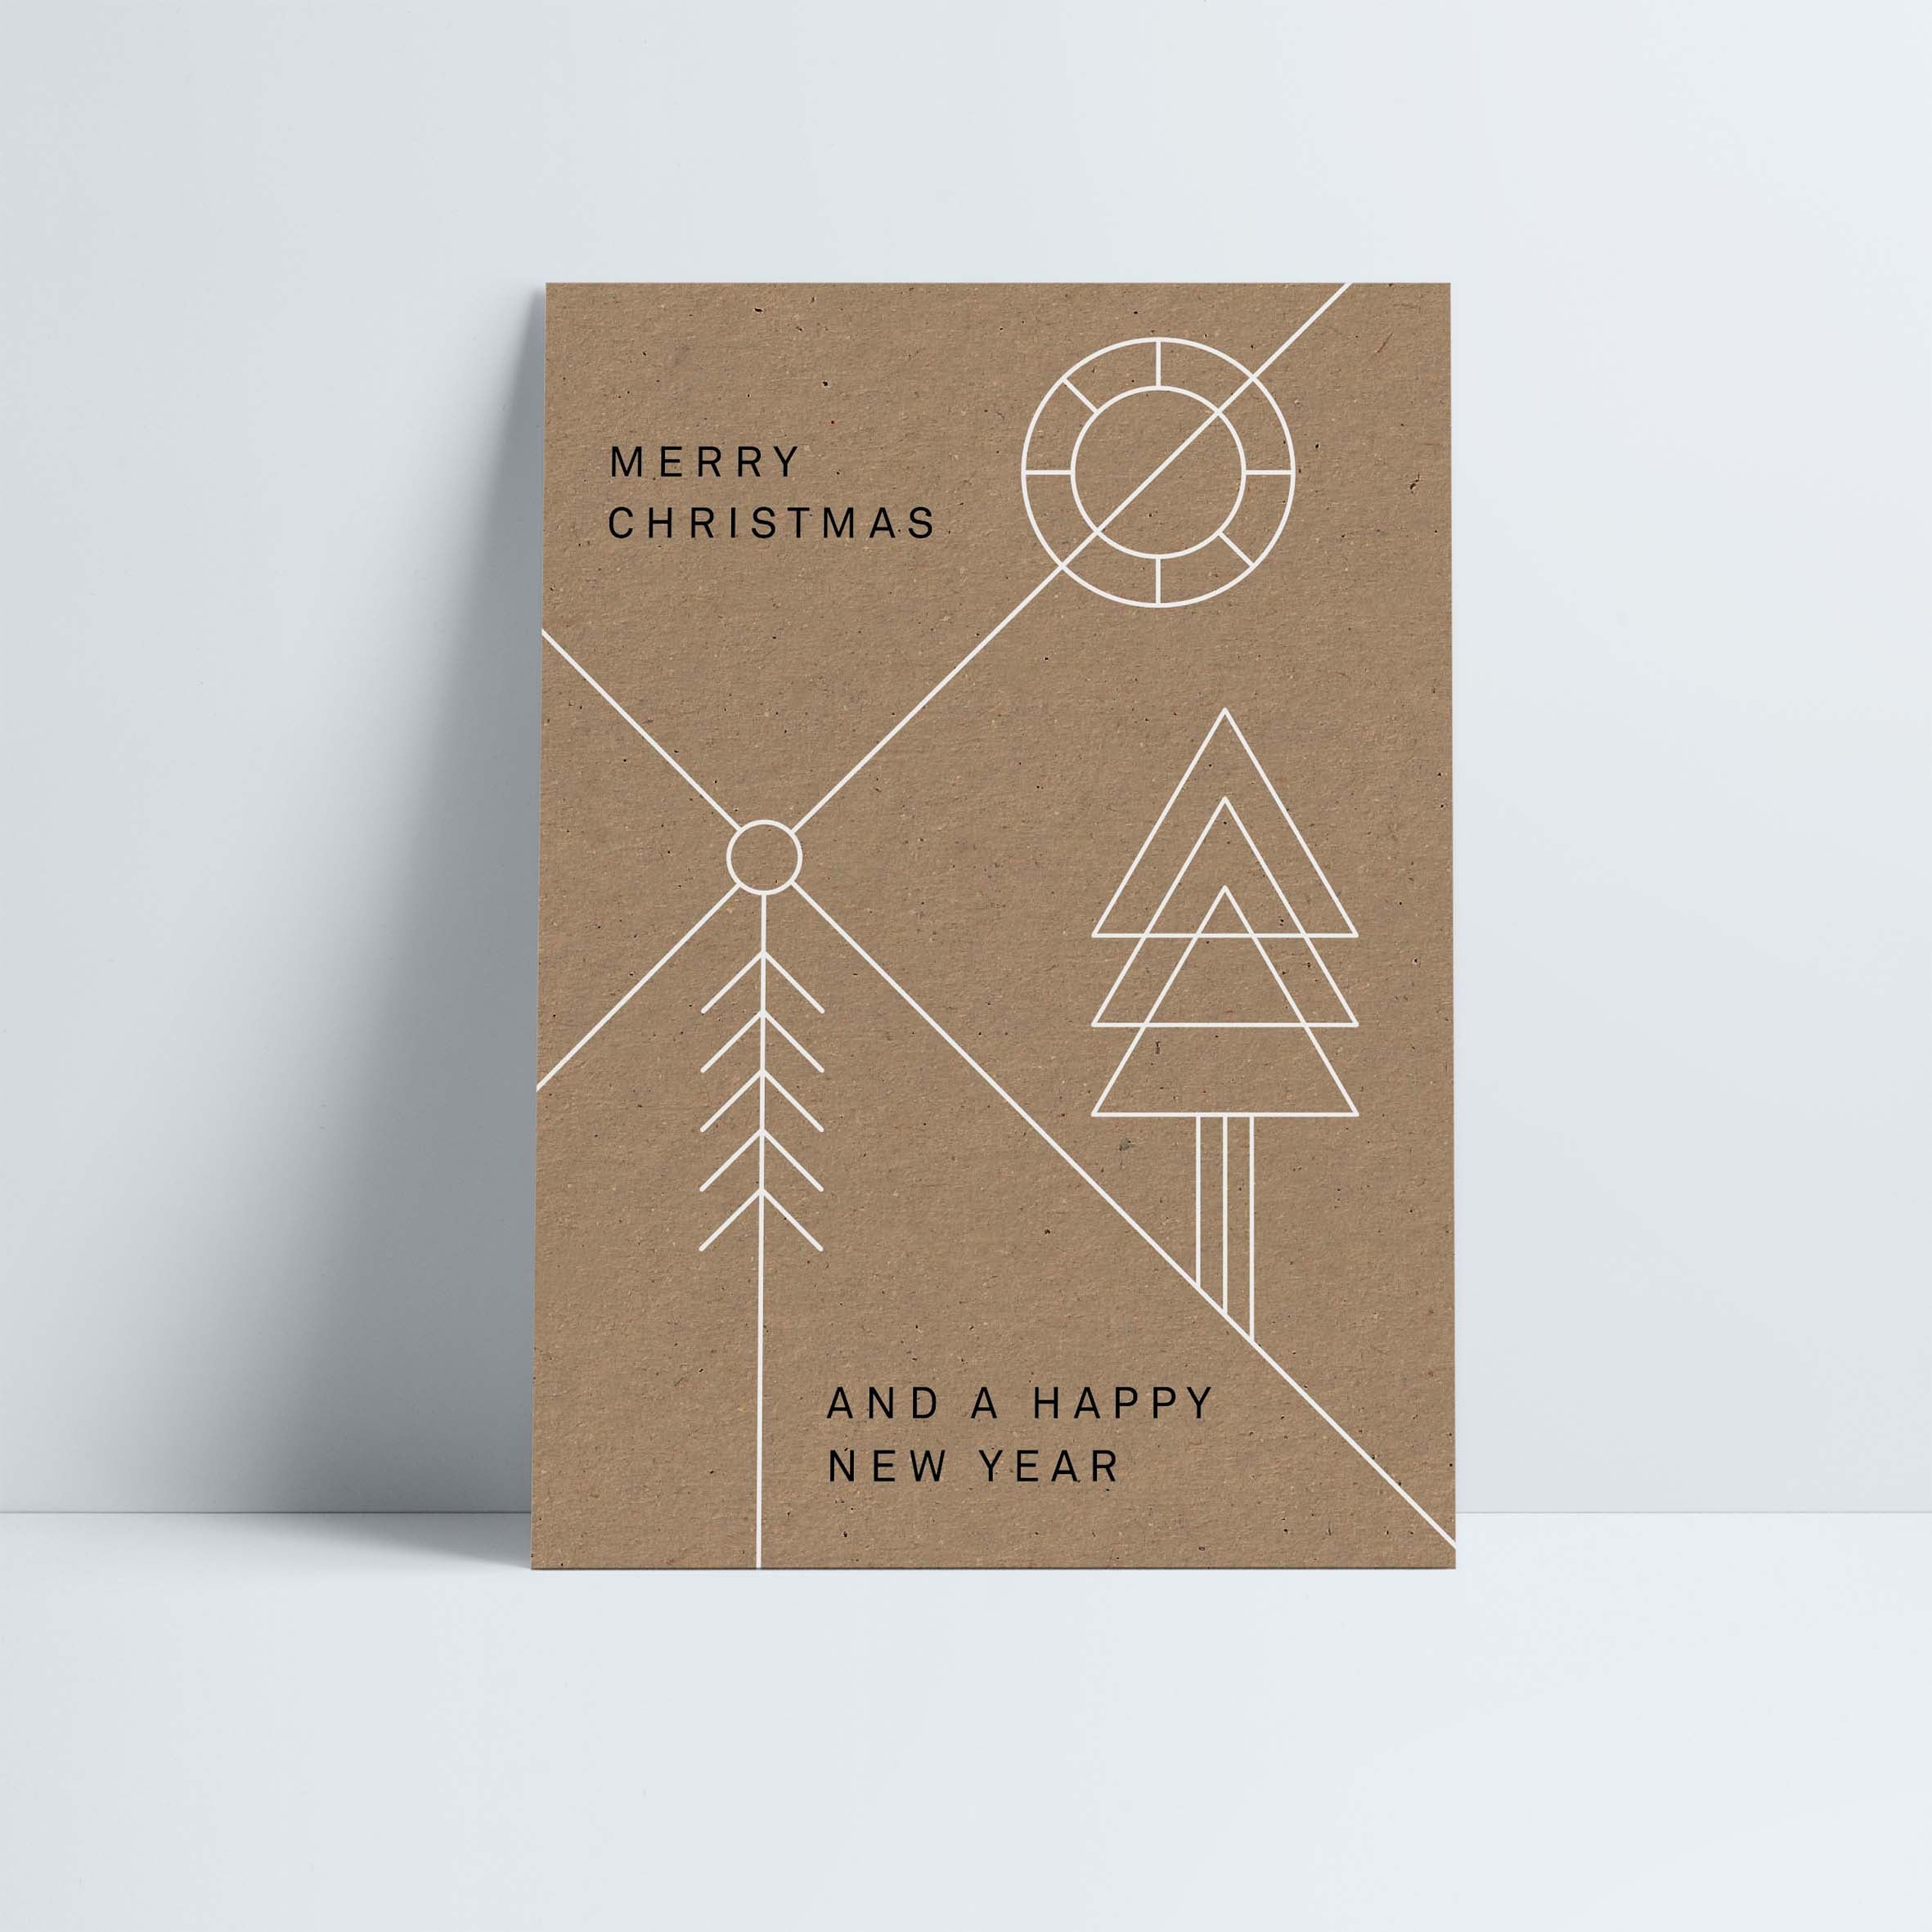 Postkarte // »Merry Christmas and a Happy New Year« Geometric